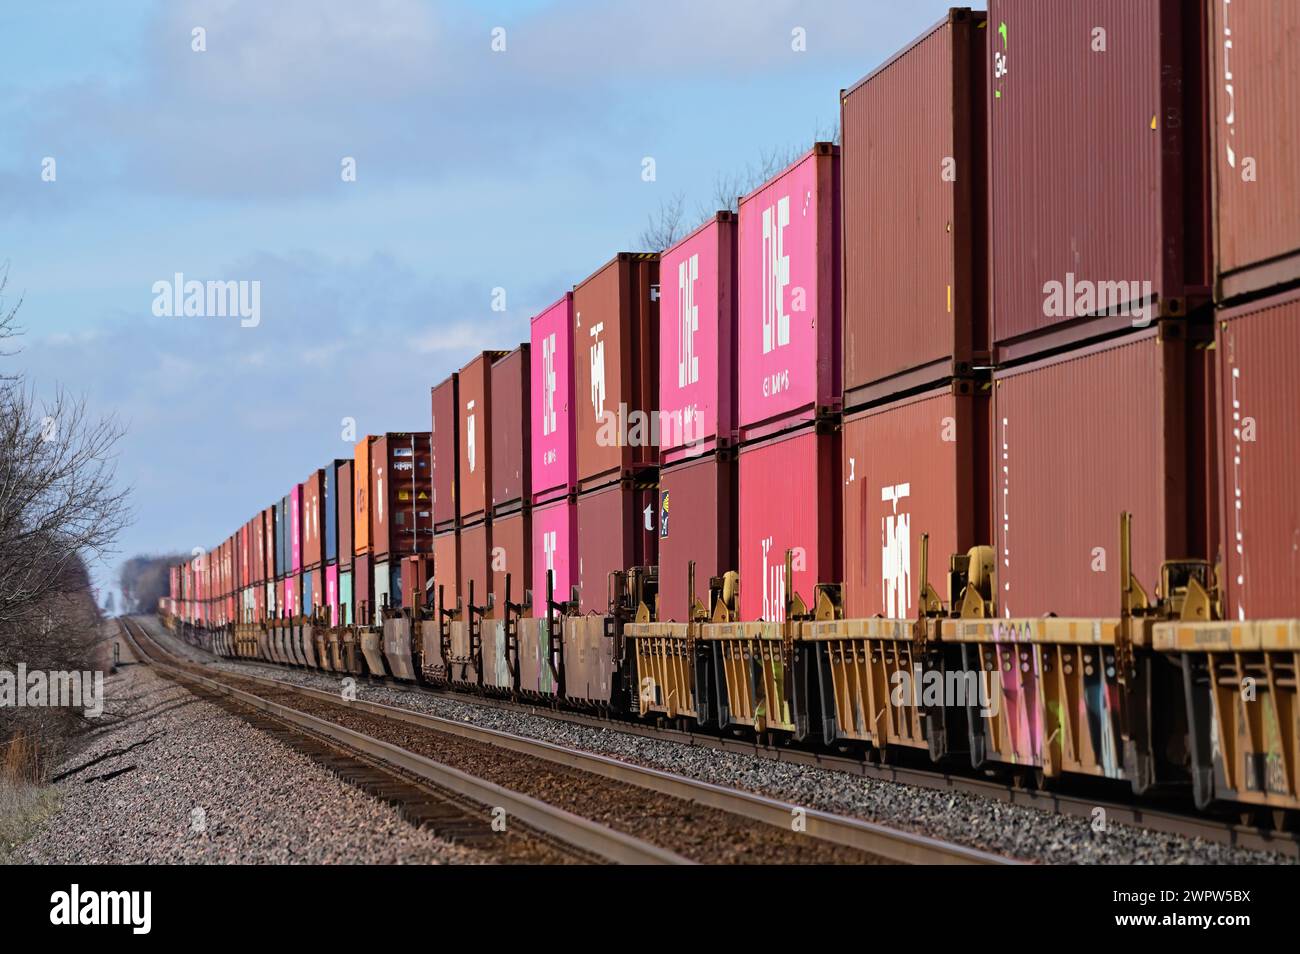 Cortland, Illinois, USA. Intermodal freight containers fill cars that stretch toward the hoizon on a Union Pacific Railroad stack train. Stock Photo